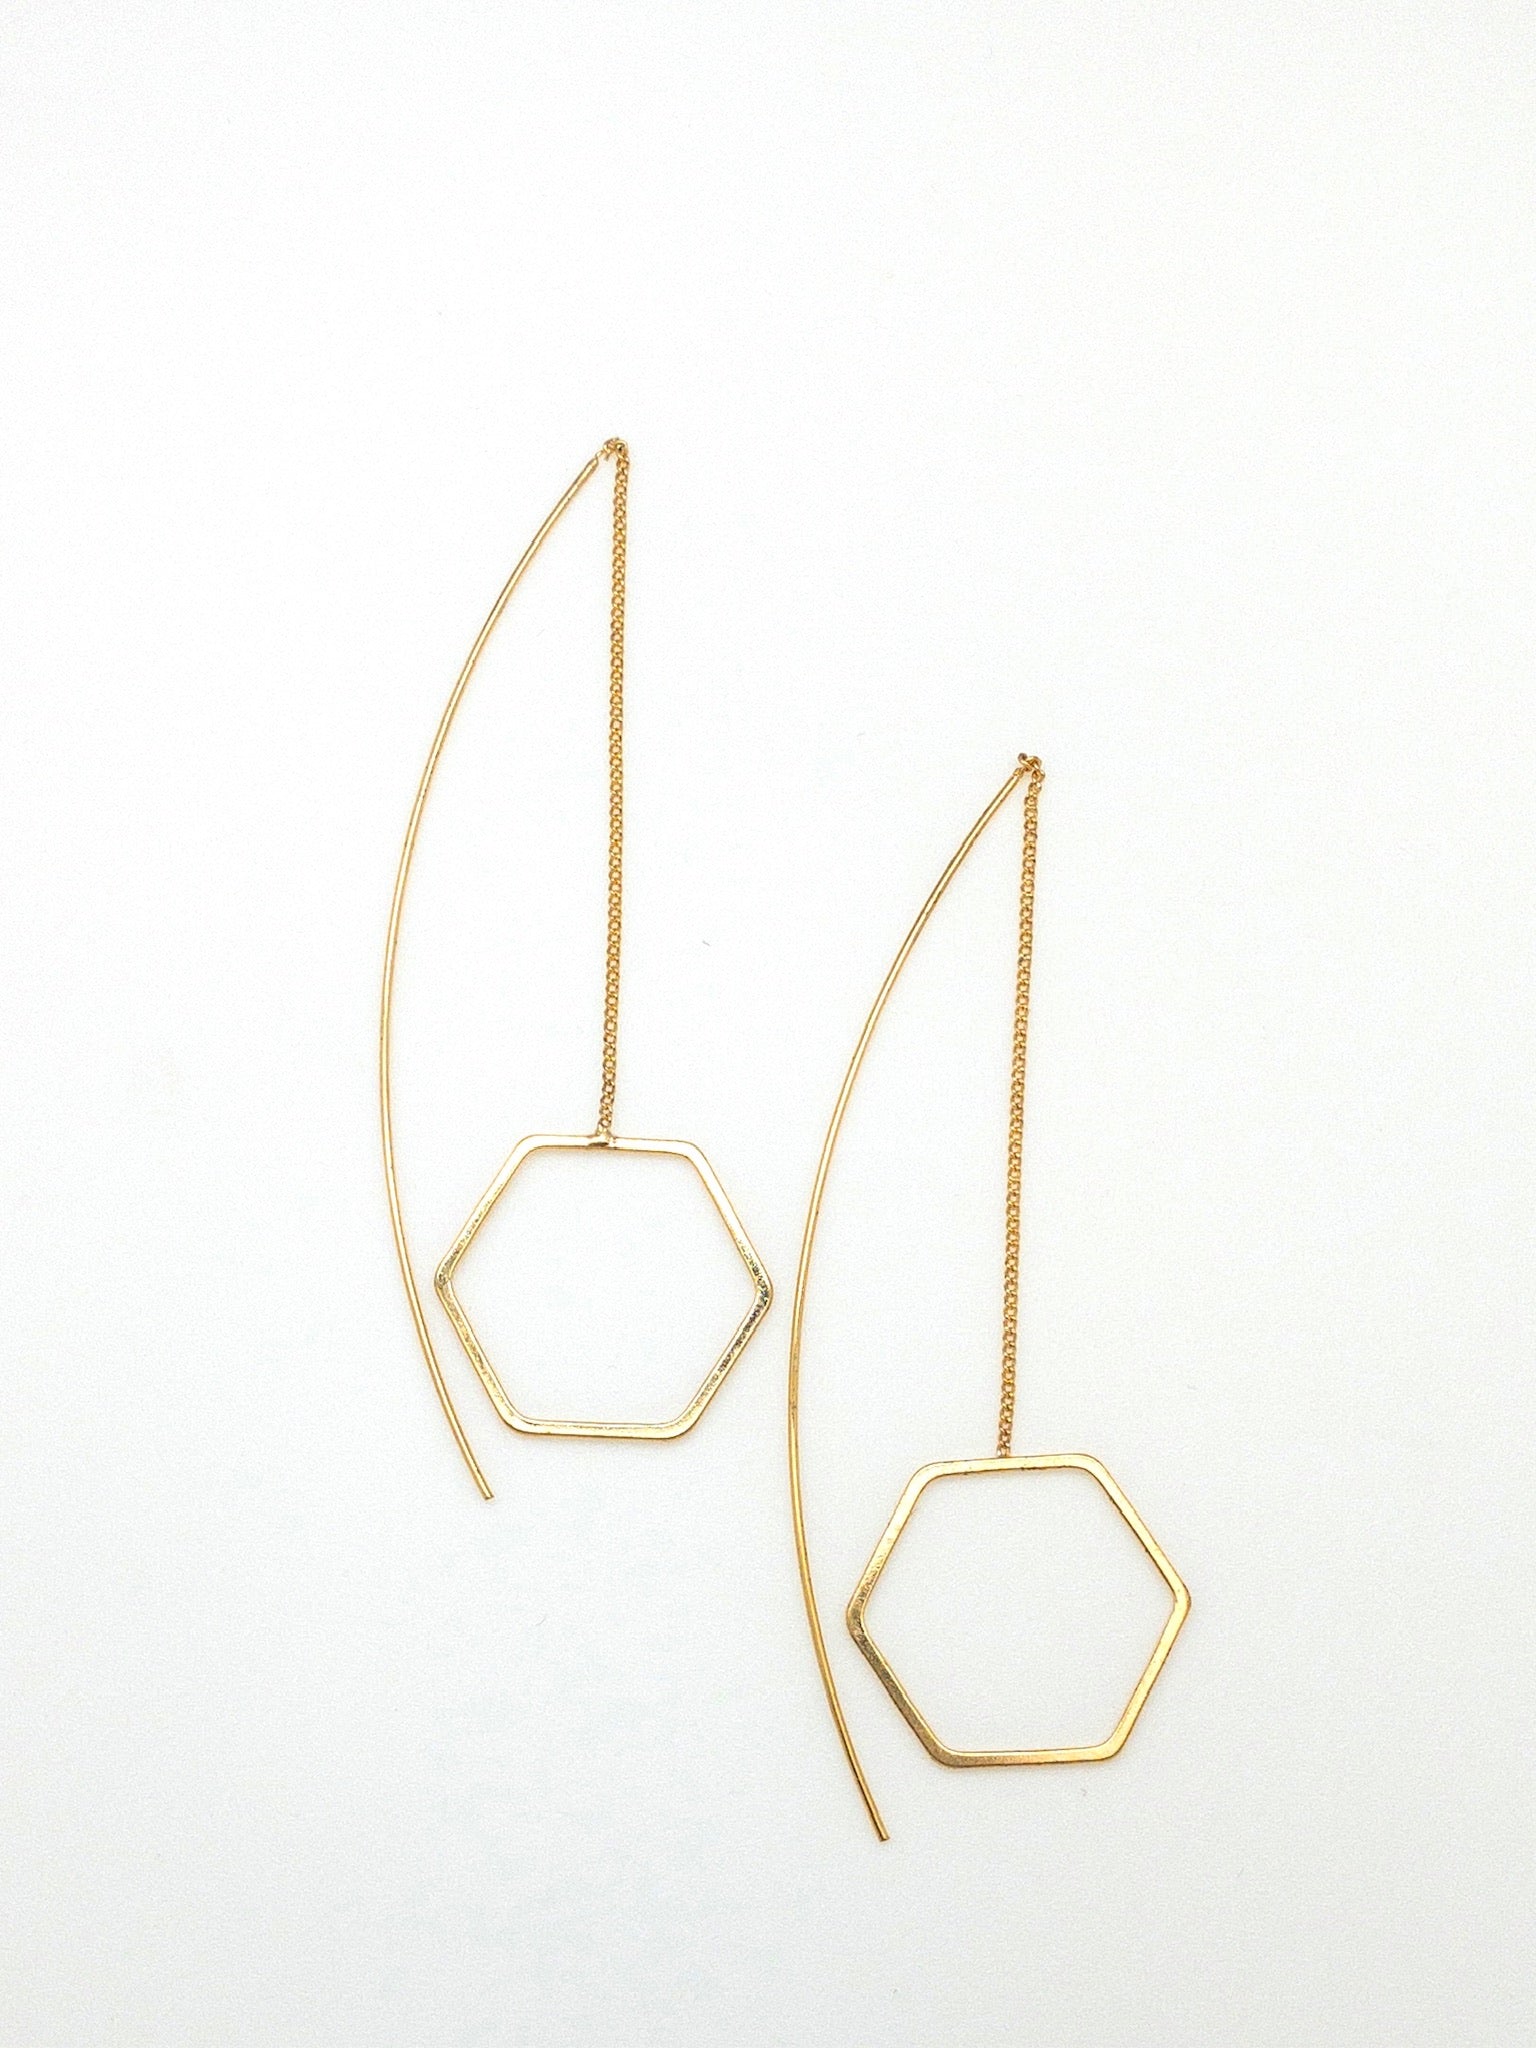 Gold Octavia earrings with dangling hexagon shaped accent 